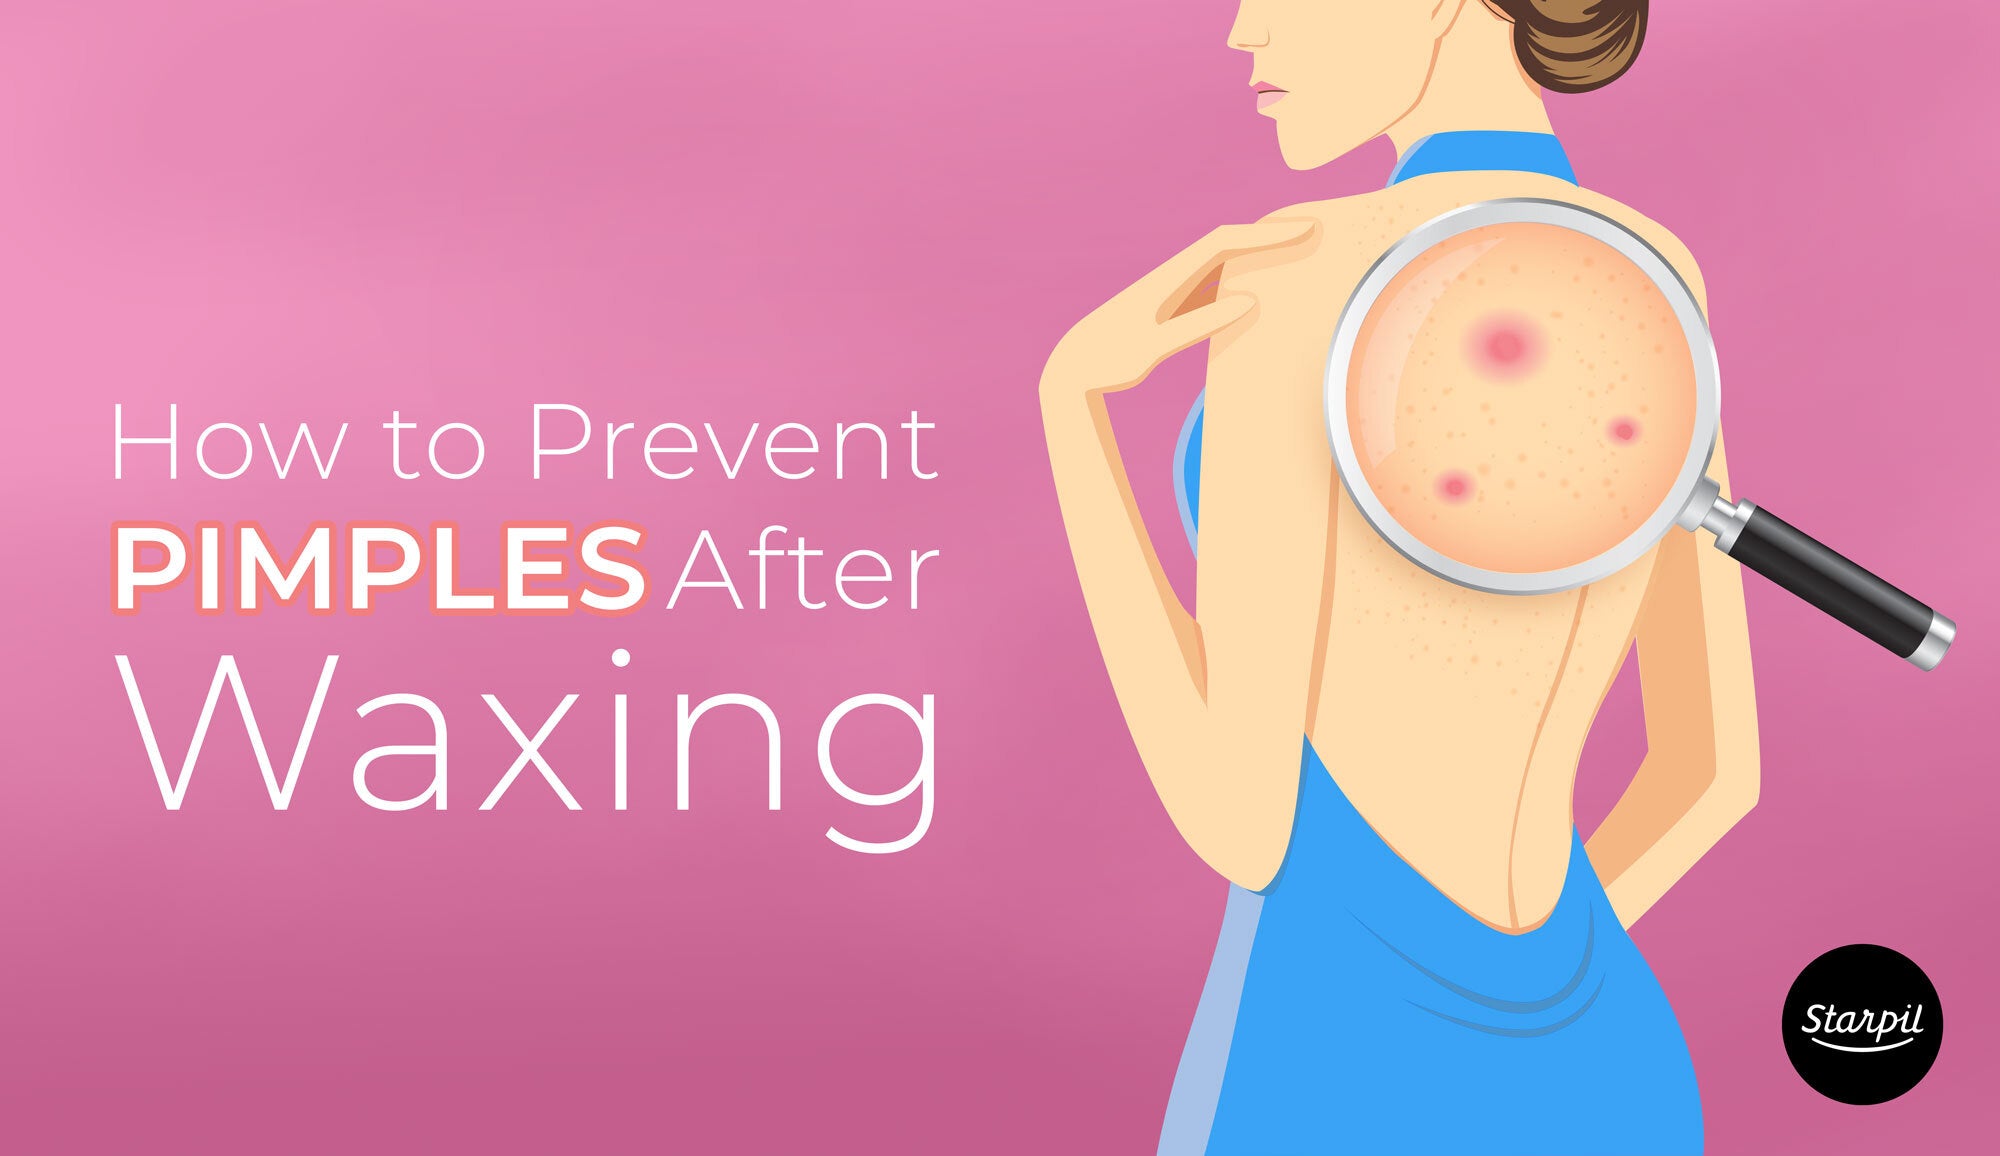 How to Prevent Pimples After Waxing